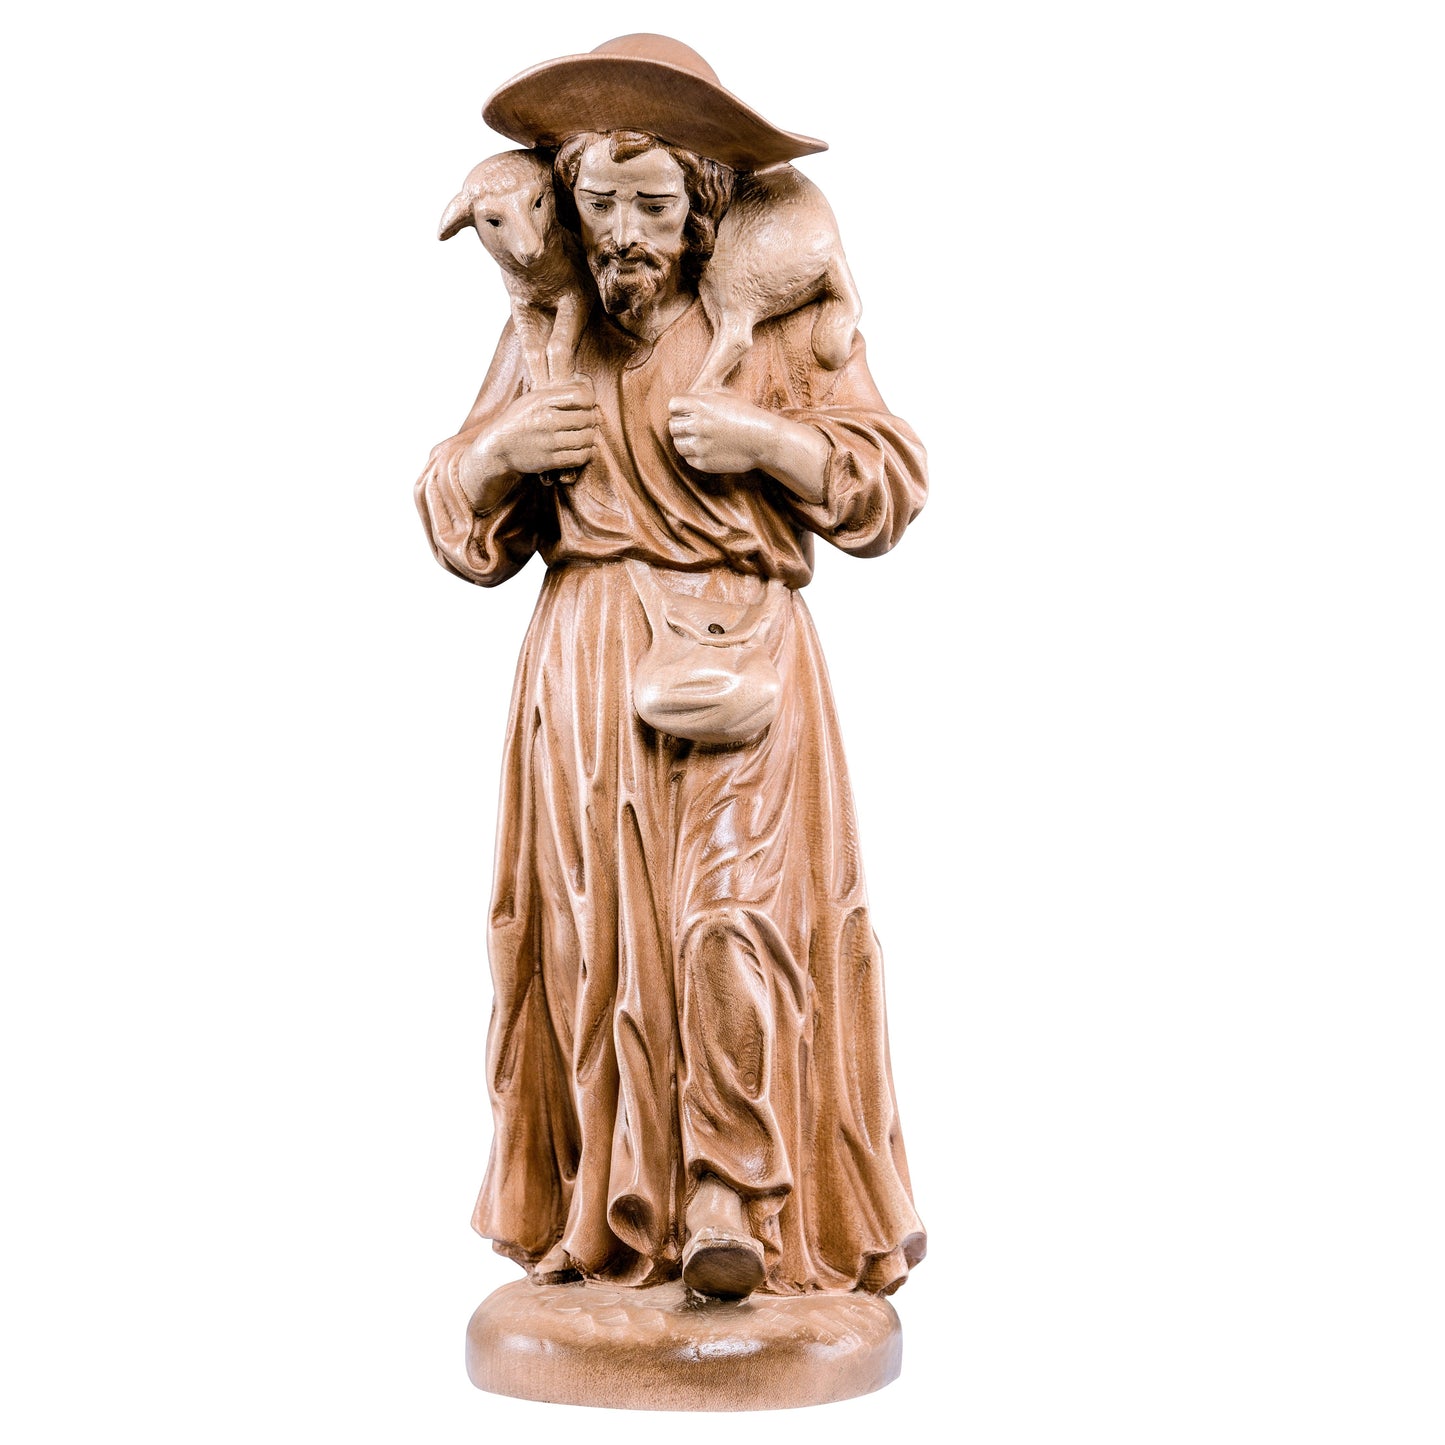 Mondo Cattolico Glossy / 35 cm (13.8 in) Wooden statue of St. Wendelin